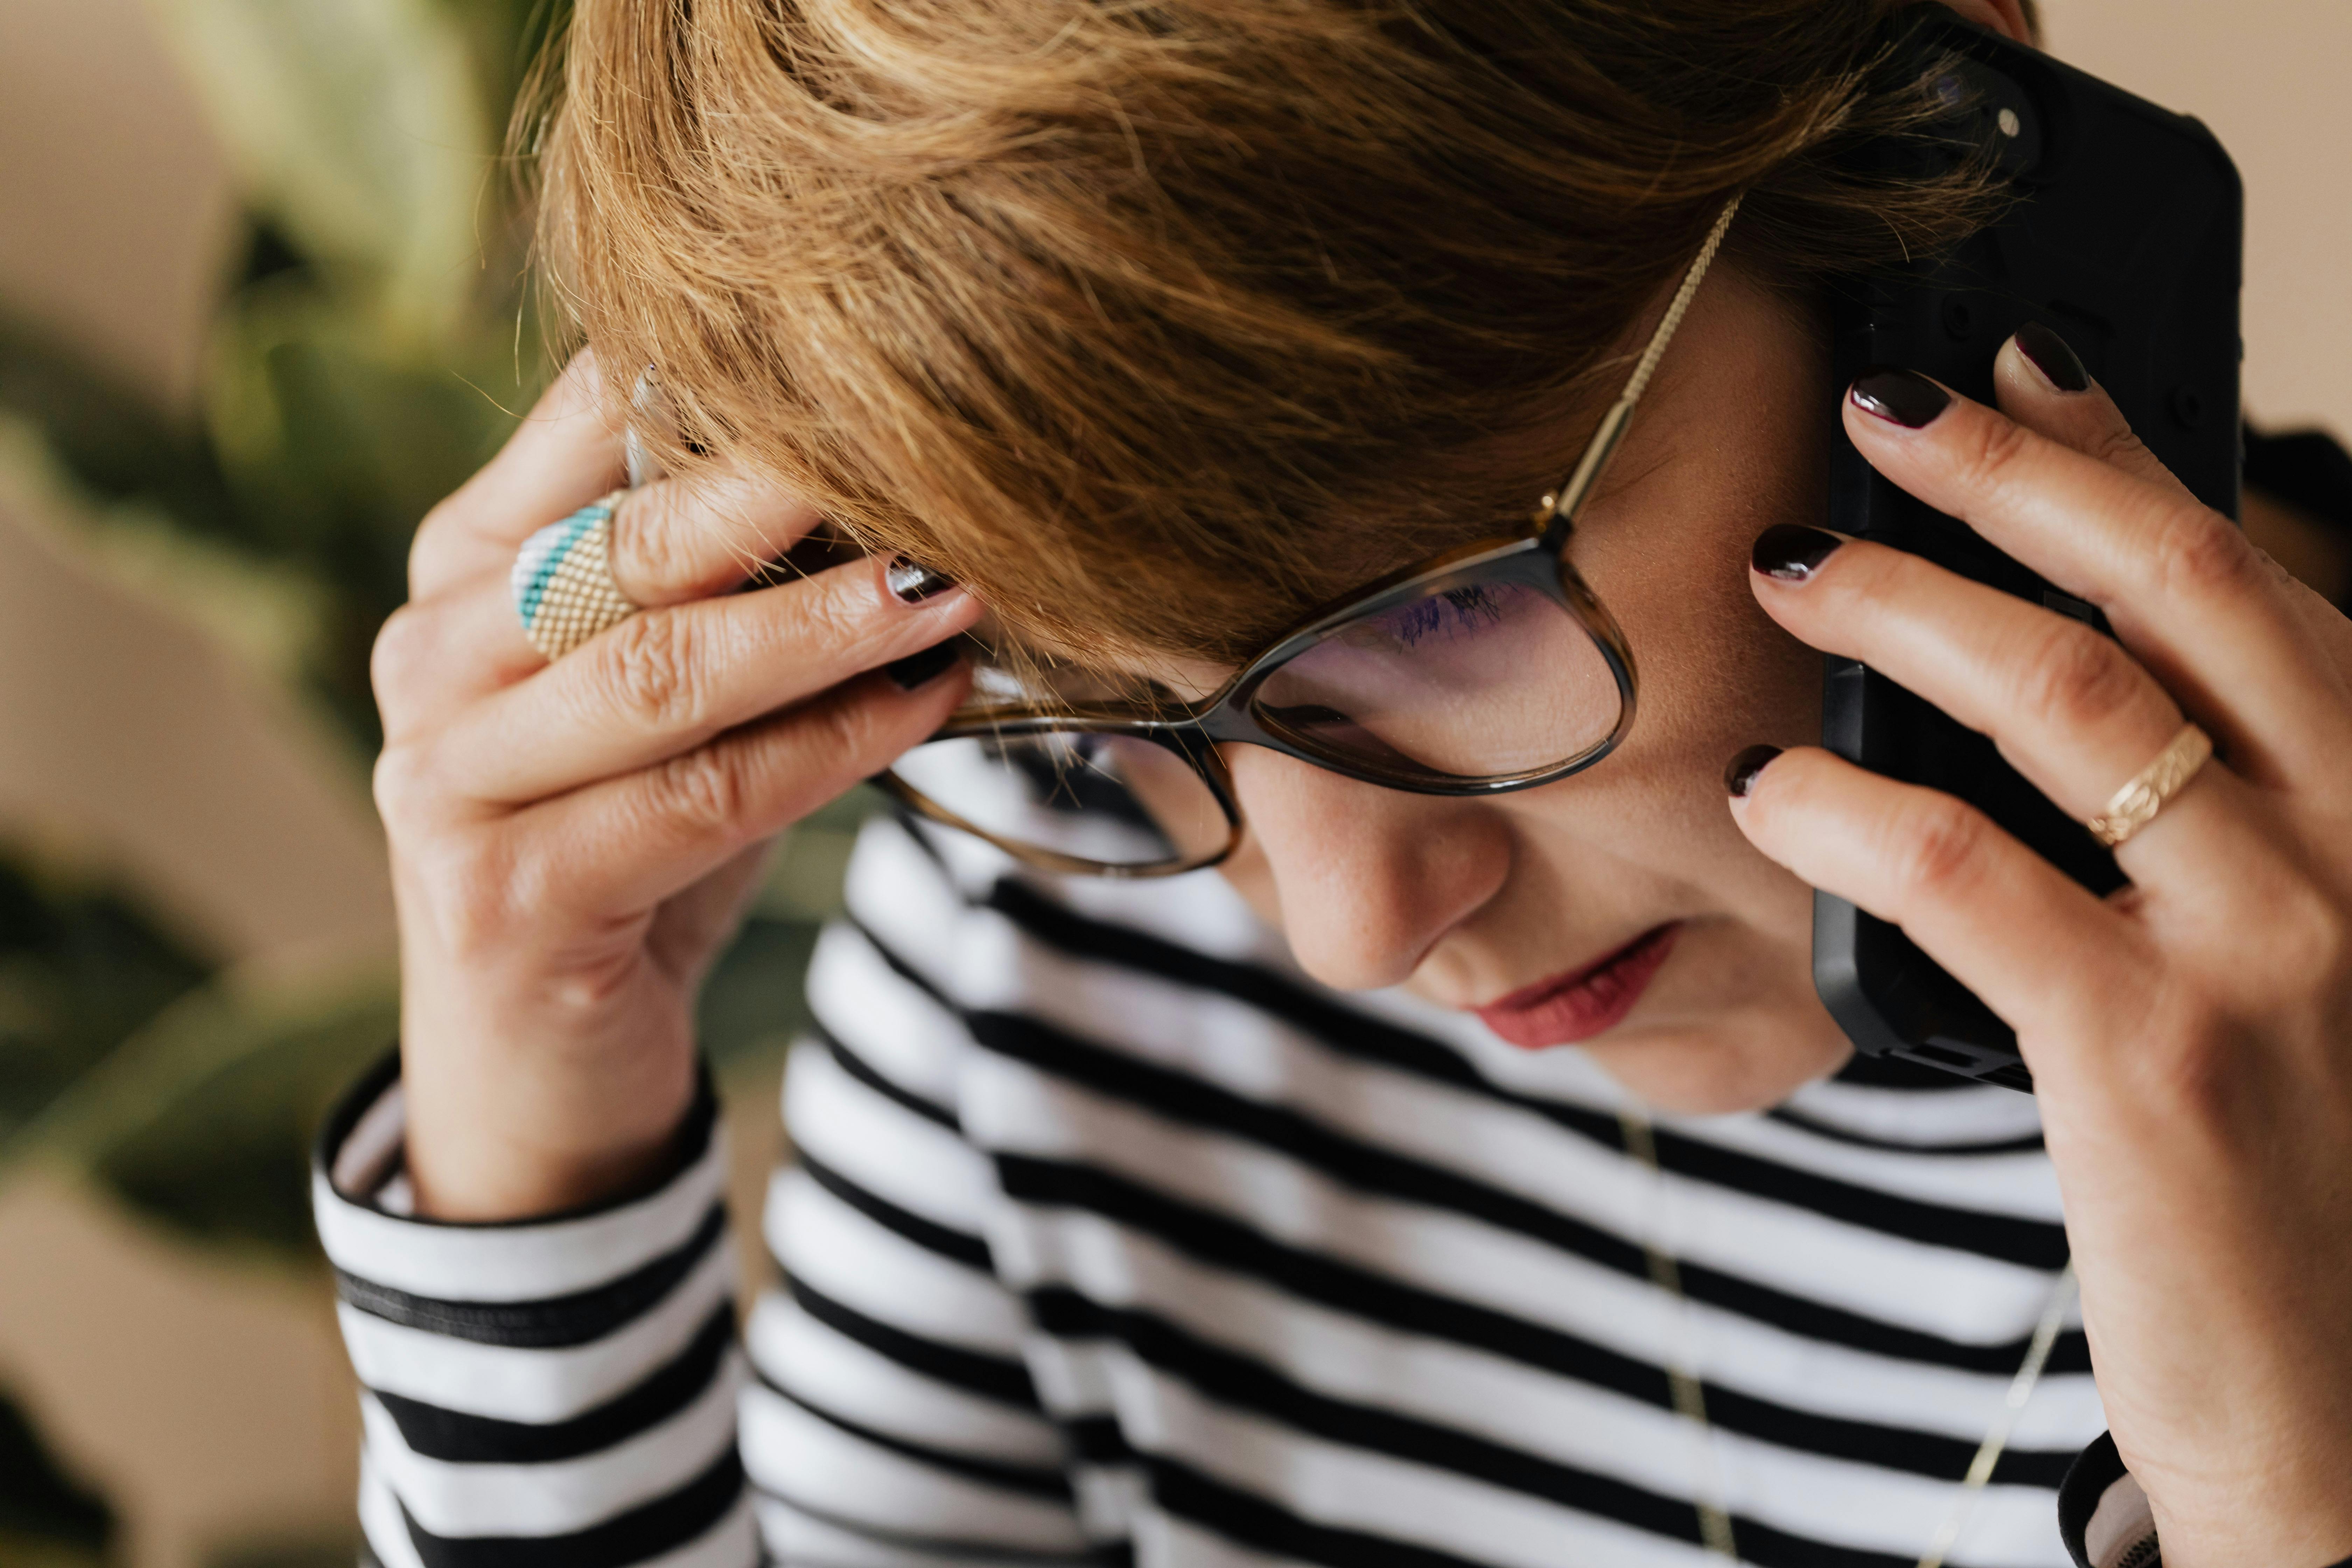 An unhappy woman having a stressful phone conversation | Source: Pexels